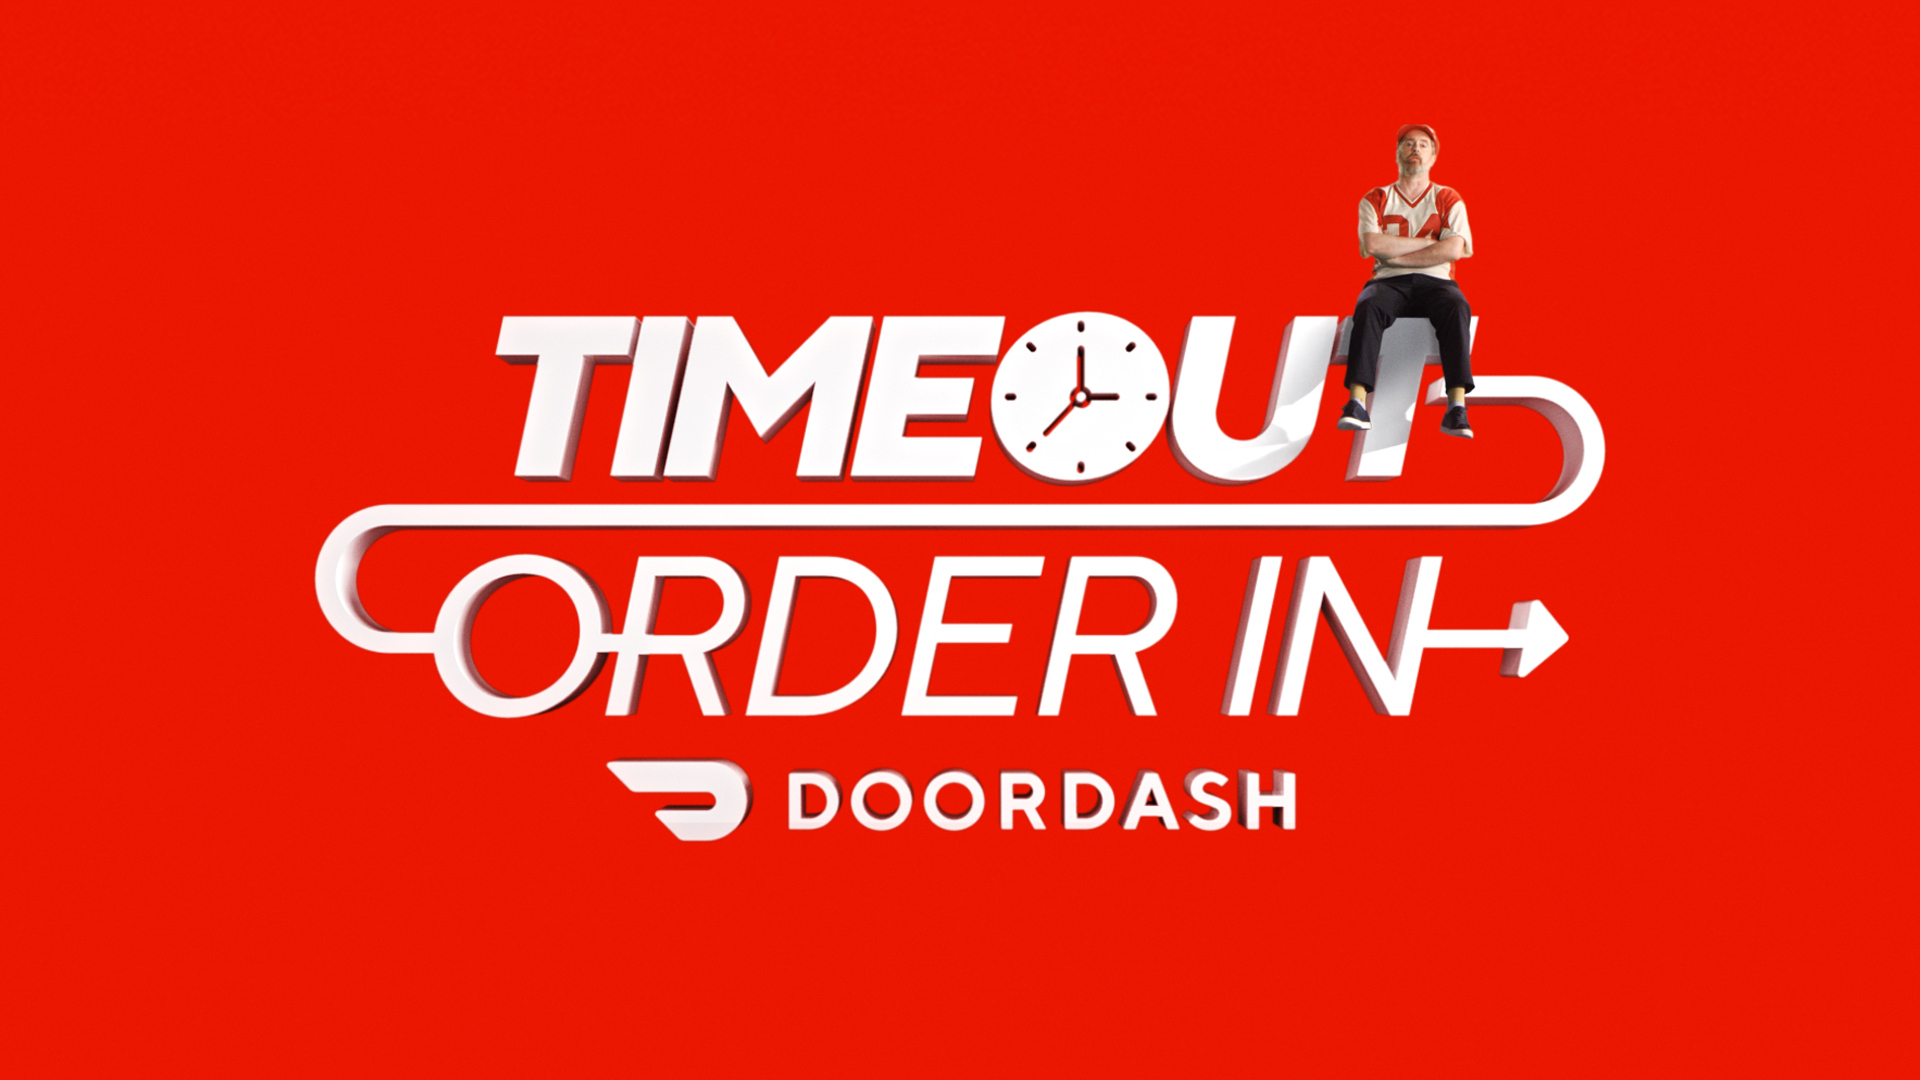 Academy+Sports%2C+DoorDash+is+working+to+deliver+items+within+an+hour